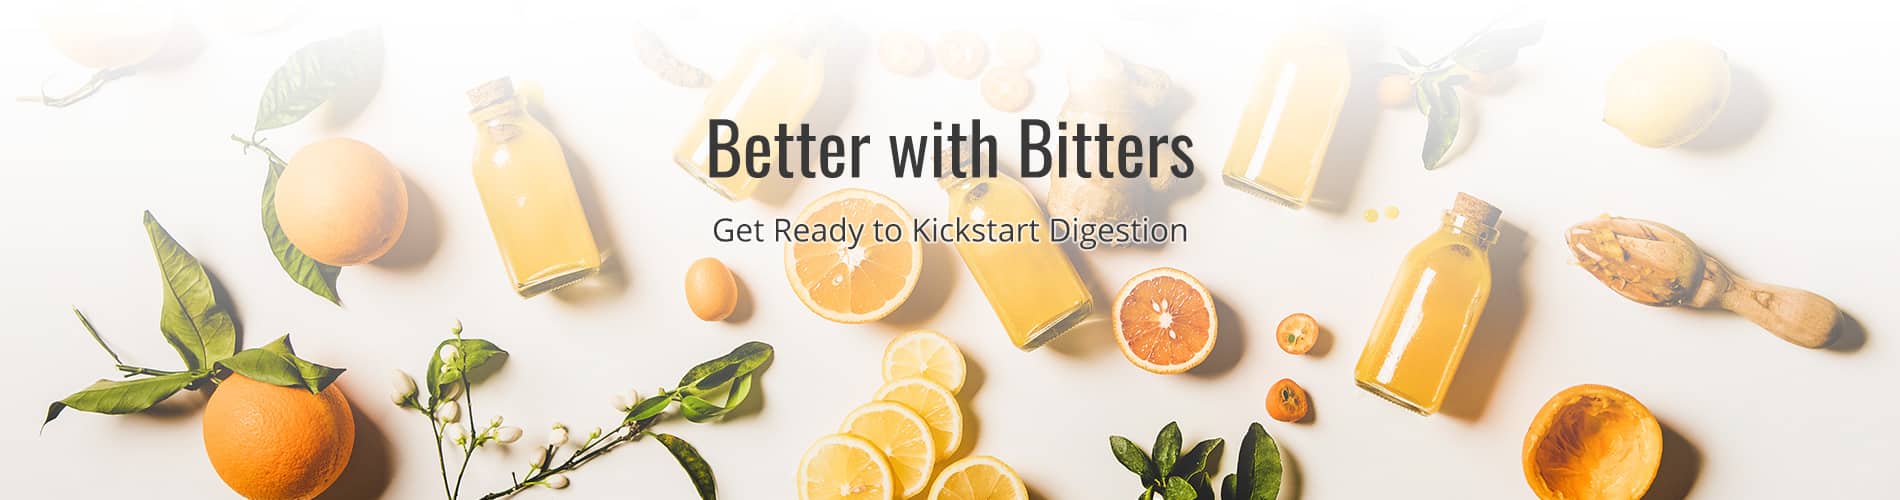 Better With Bitters